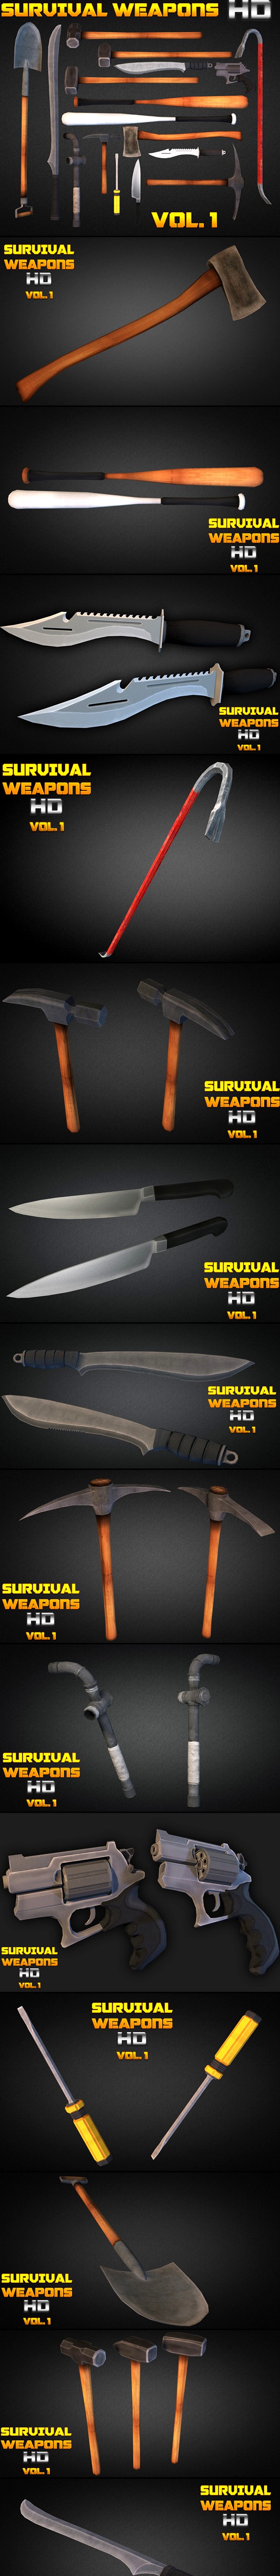 Survival Weapons HD - Vol 1 - Low Poly